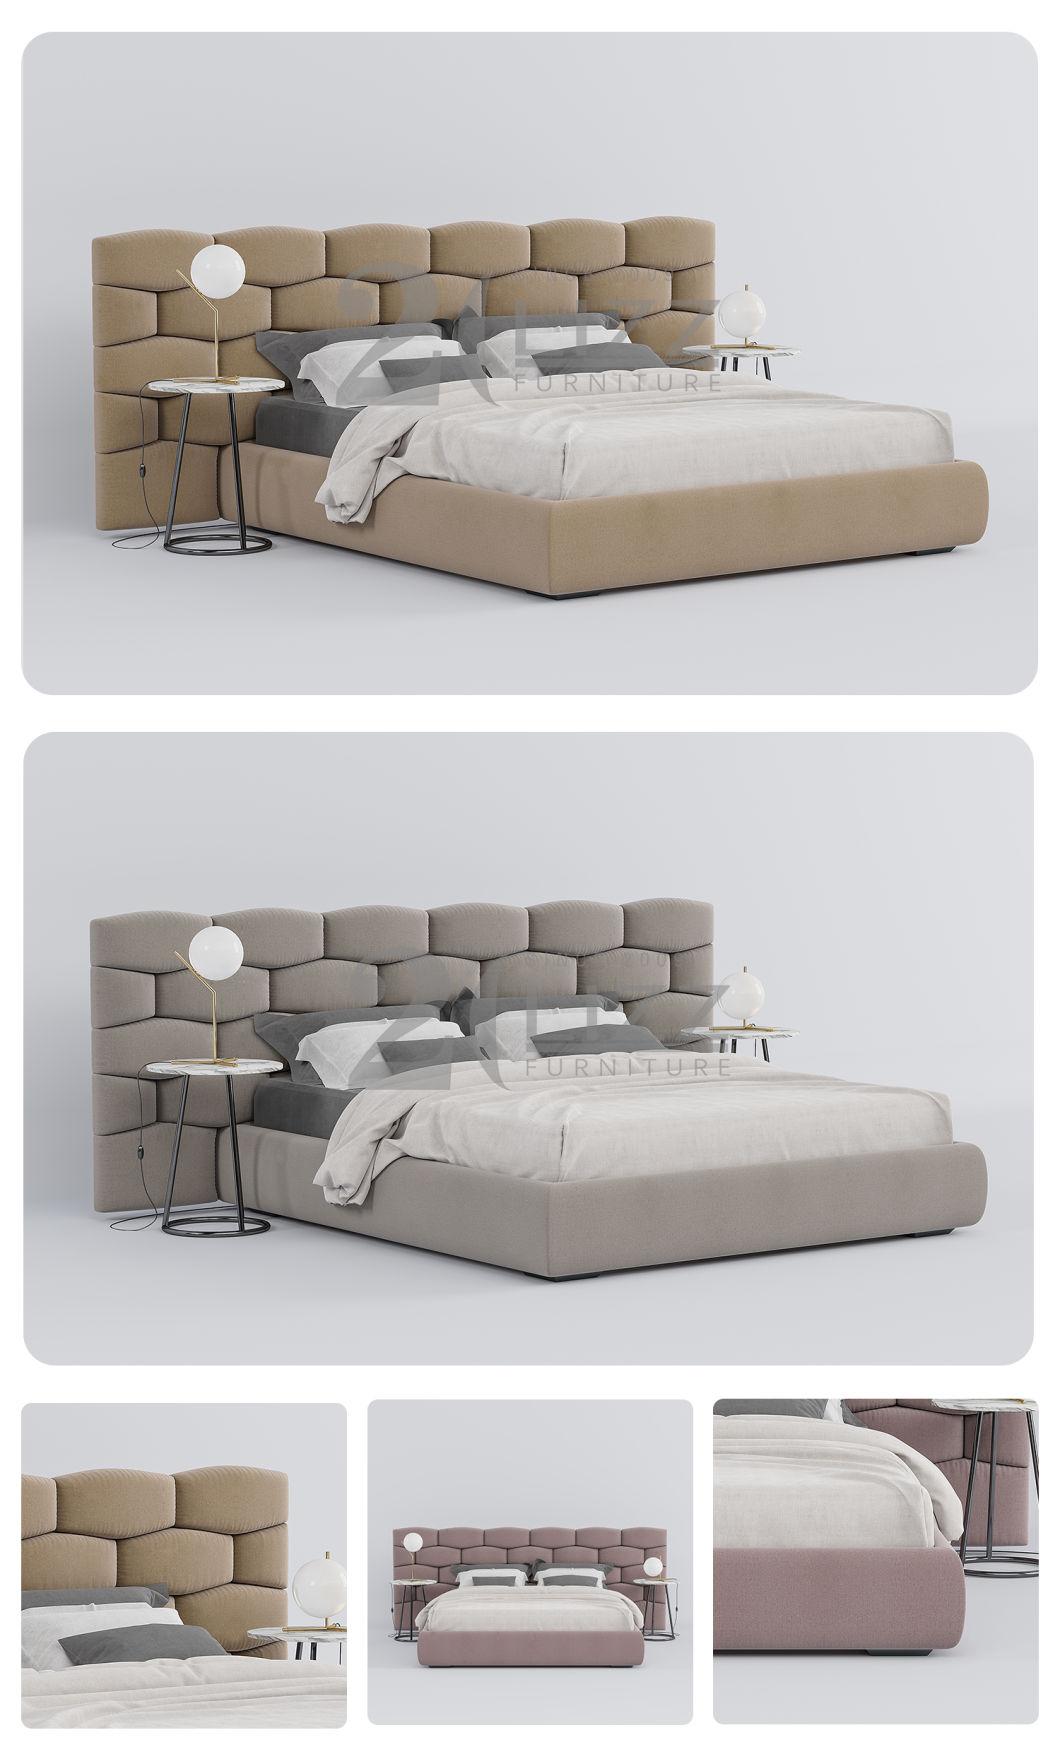 Luxury Hotel & Home Bedroom Furniture Modern Fabric Headboard King Size Bed with Good Quality